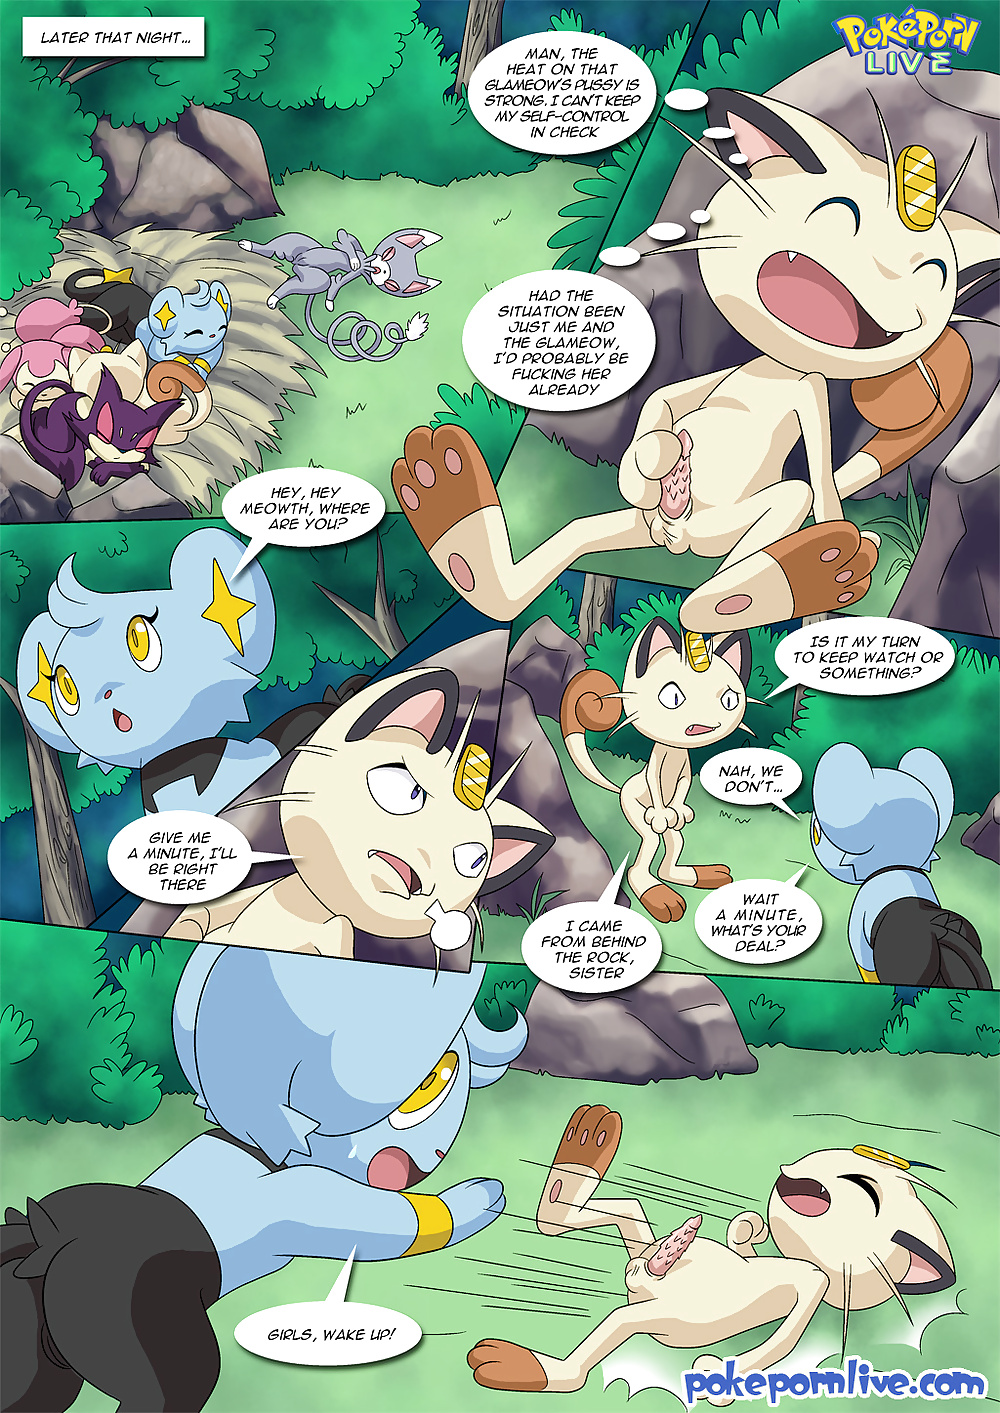 Pokeporn Live-The Cat's Meowth #35303242